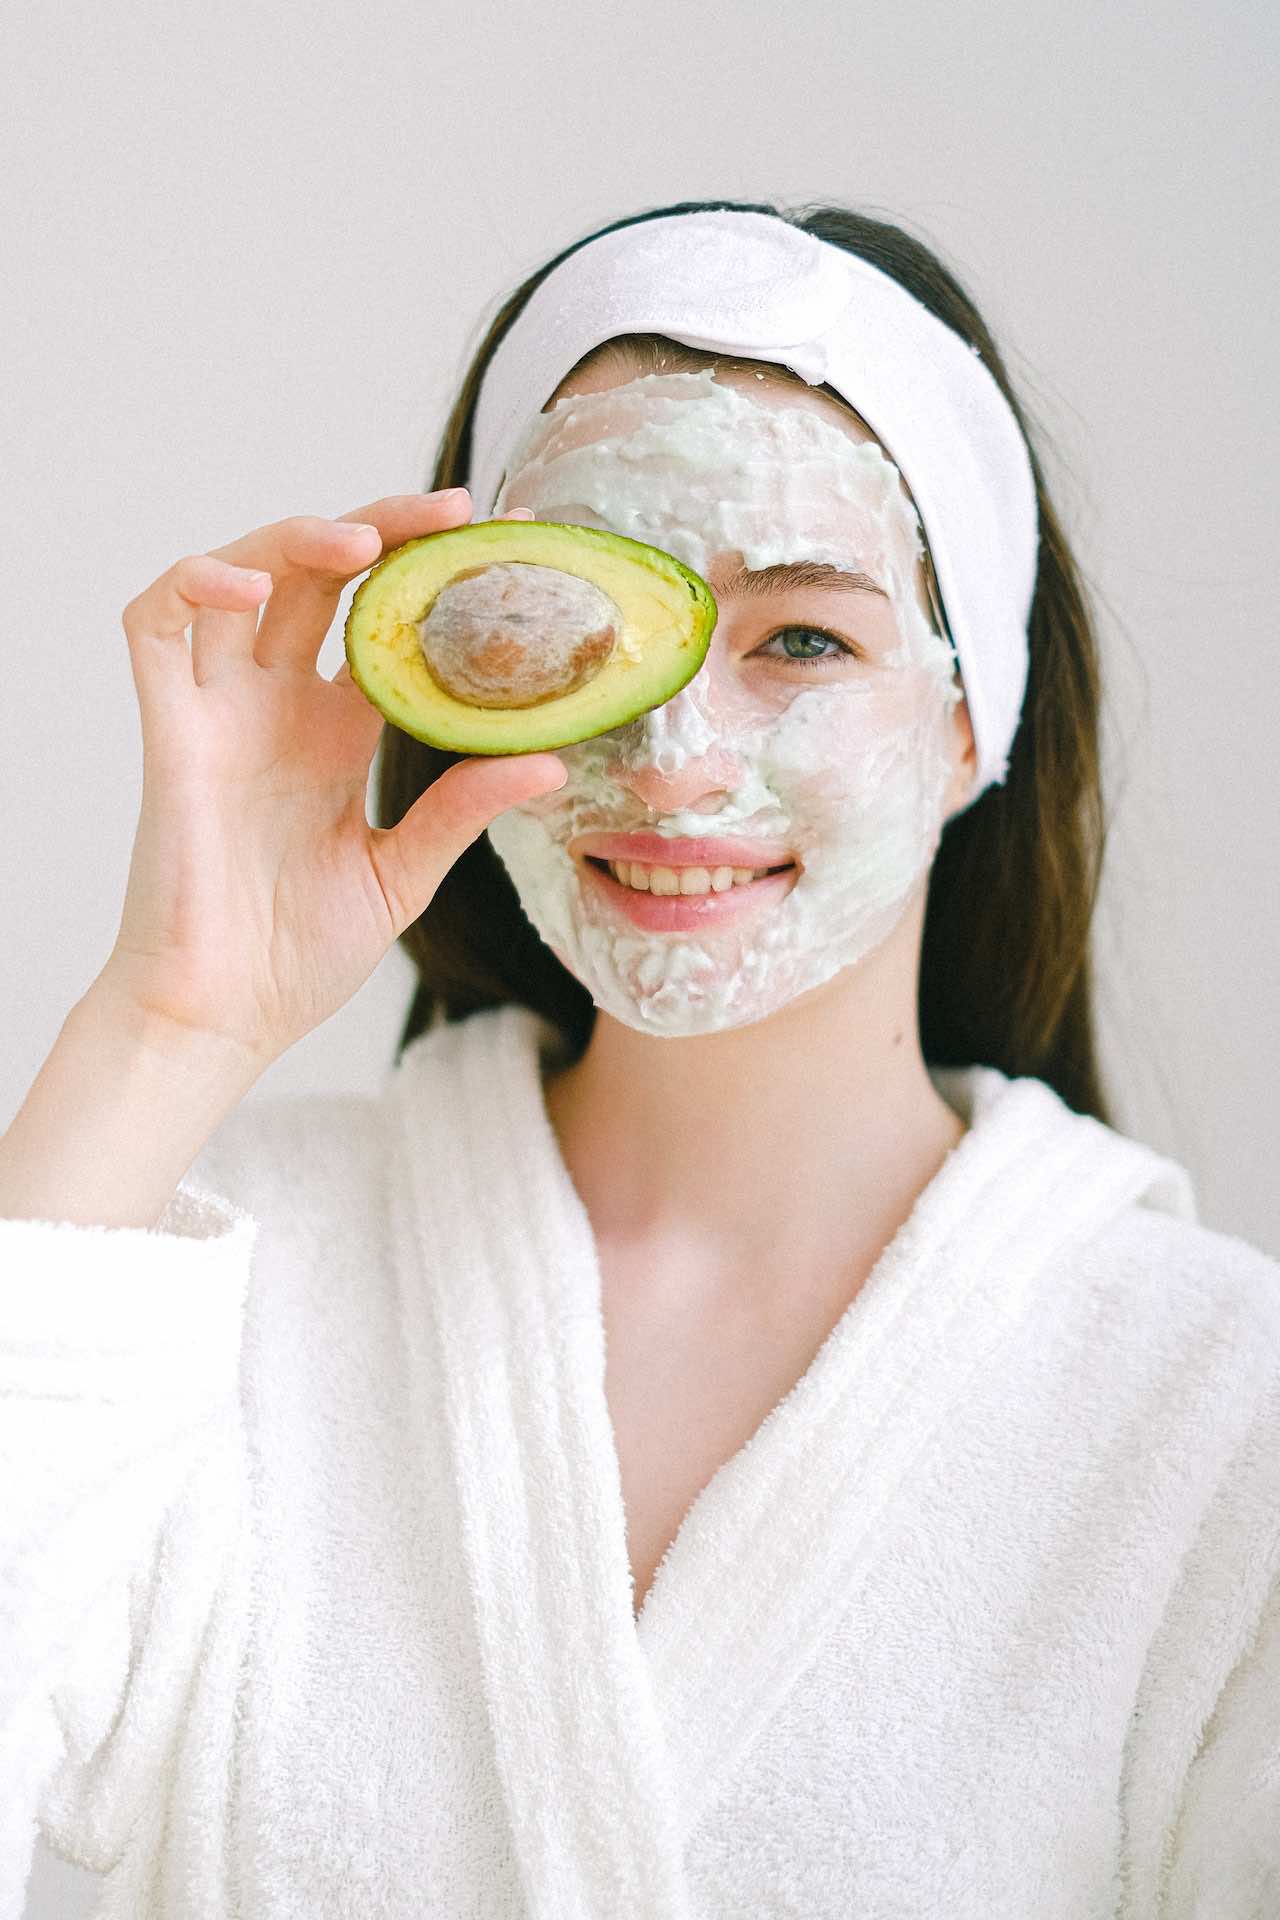 Relaxing mask based on oatmeal and avocado